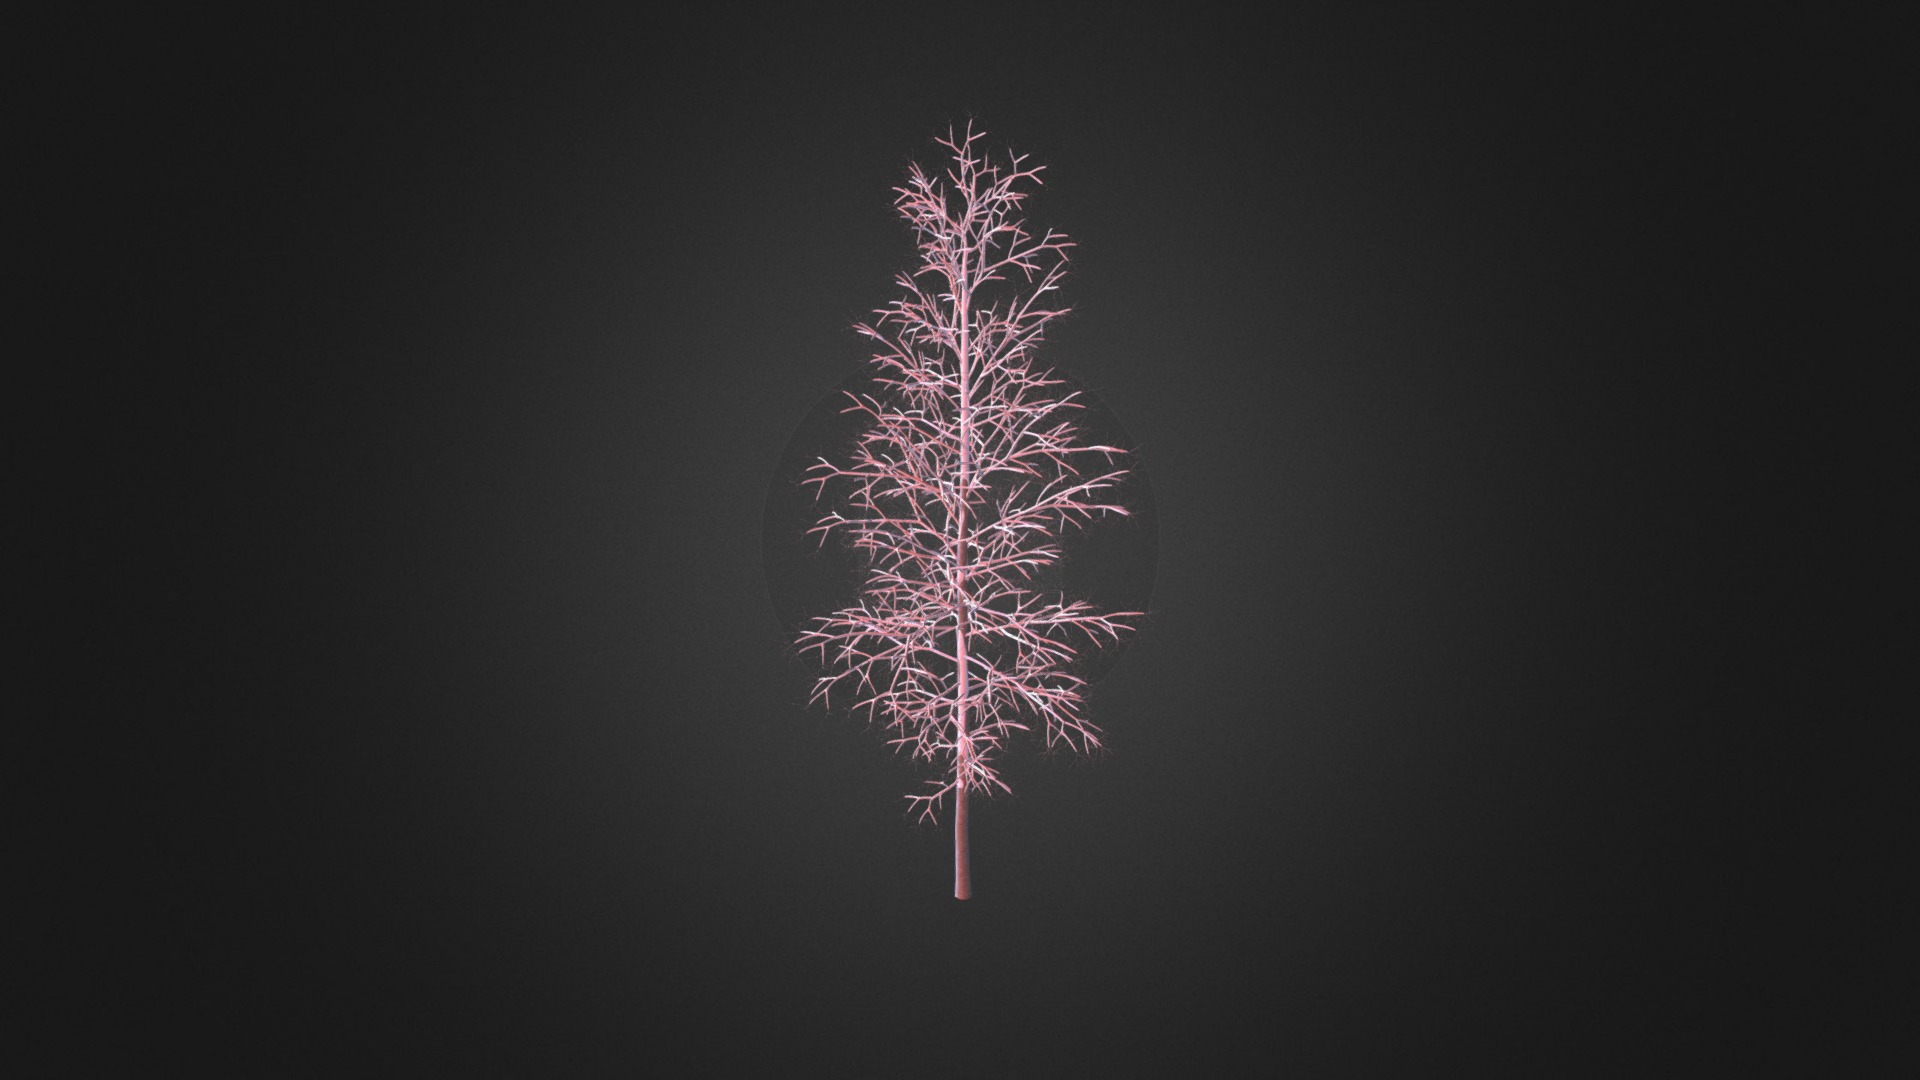 3D model Quaking Aspen with Snow 3D Model 7m - This is a 3D model of the Quaking Aspen with Snow 3D Model 7m. The 3D model is about a purple and pink tree.